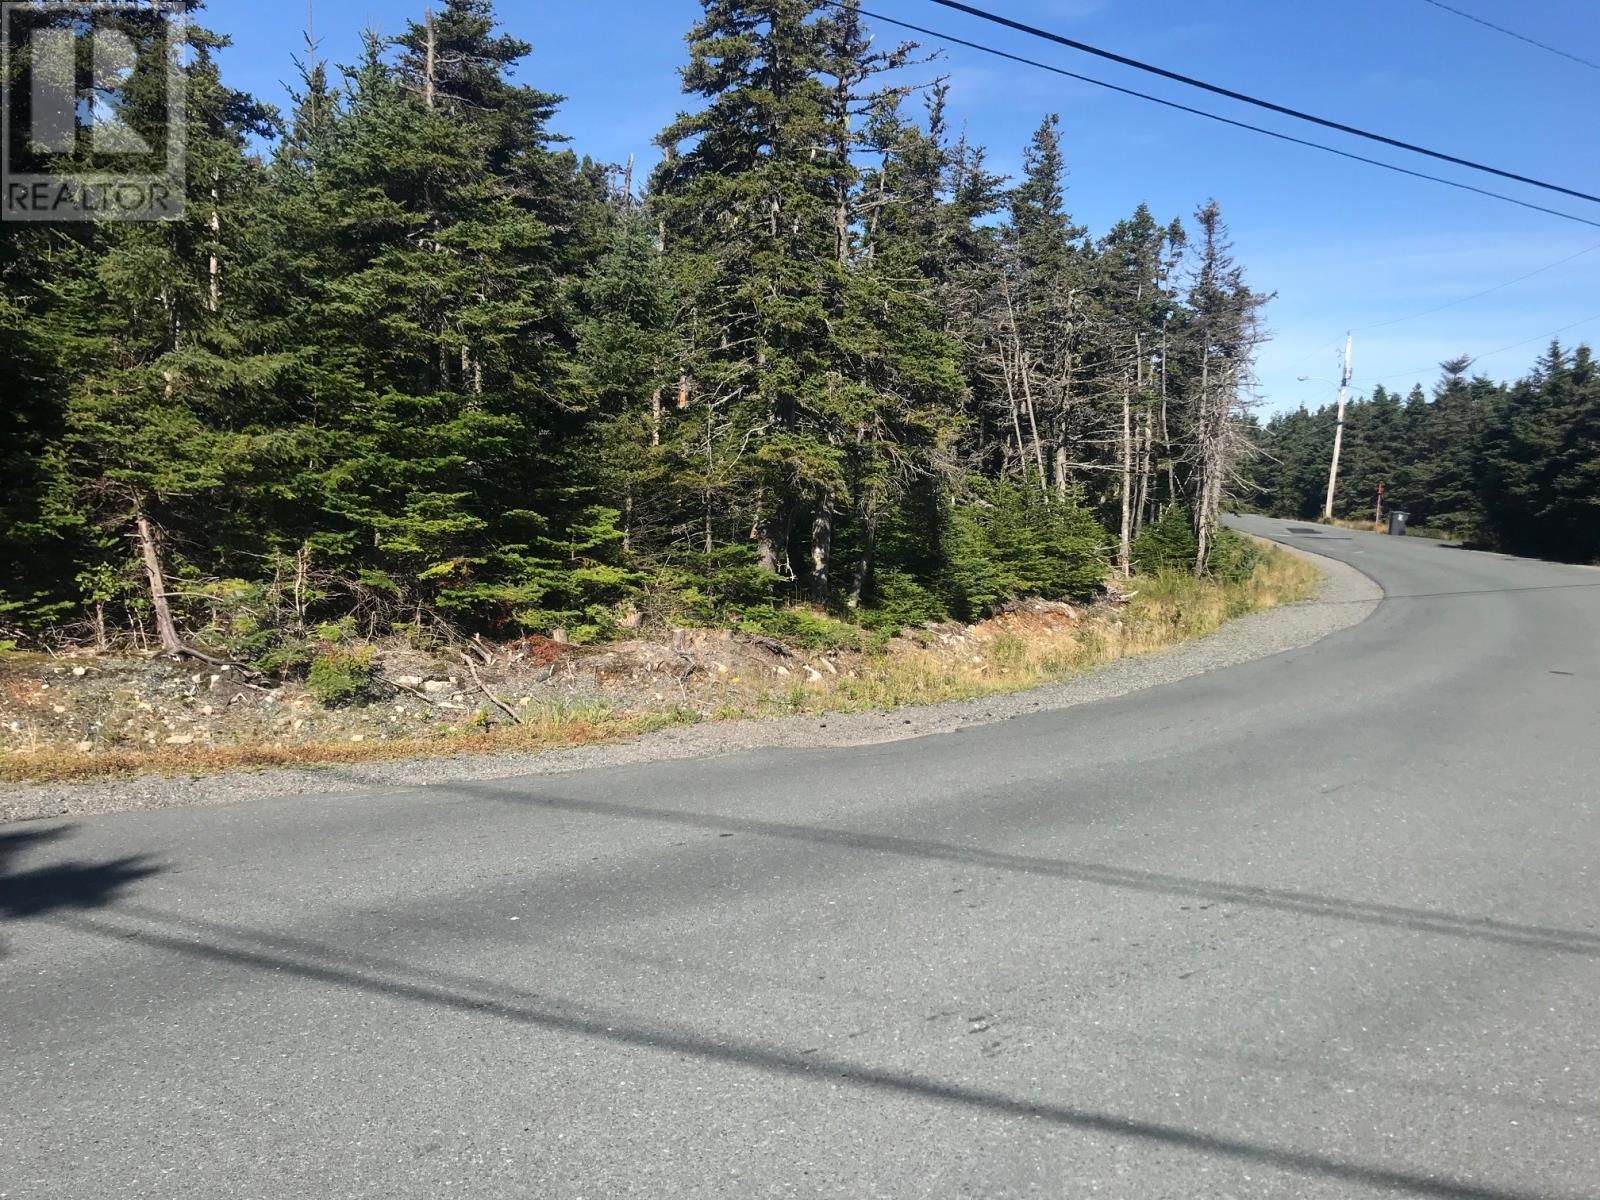 Main Photo: 160 - 180 (Lot 4) Spruce Hill Road in Conception Bay South: Vacant Land for sale : MLS®# 1239198